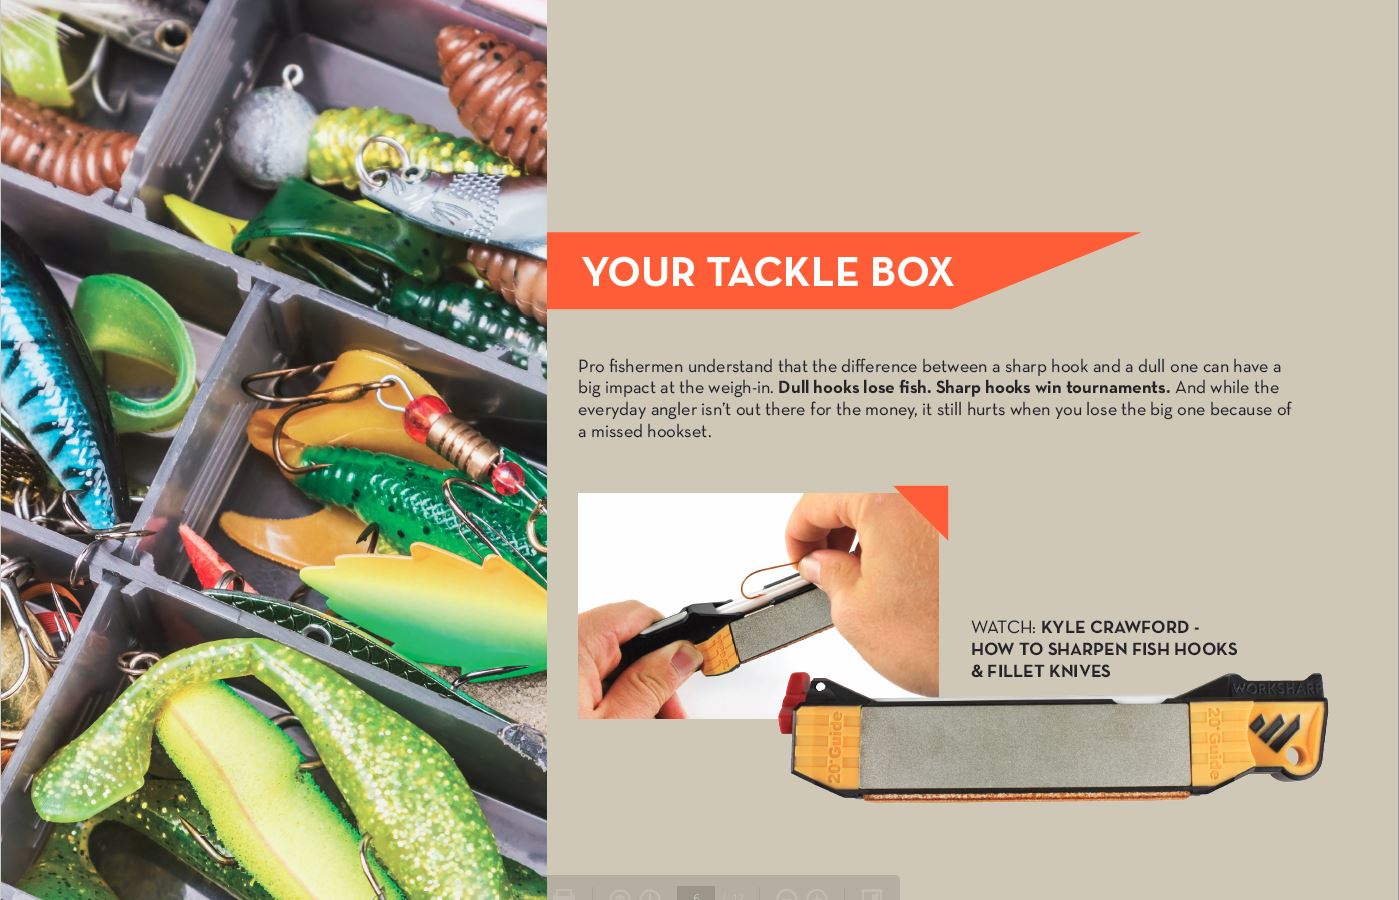 Sharpening From Your Tackle Box